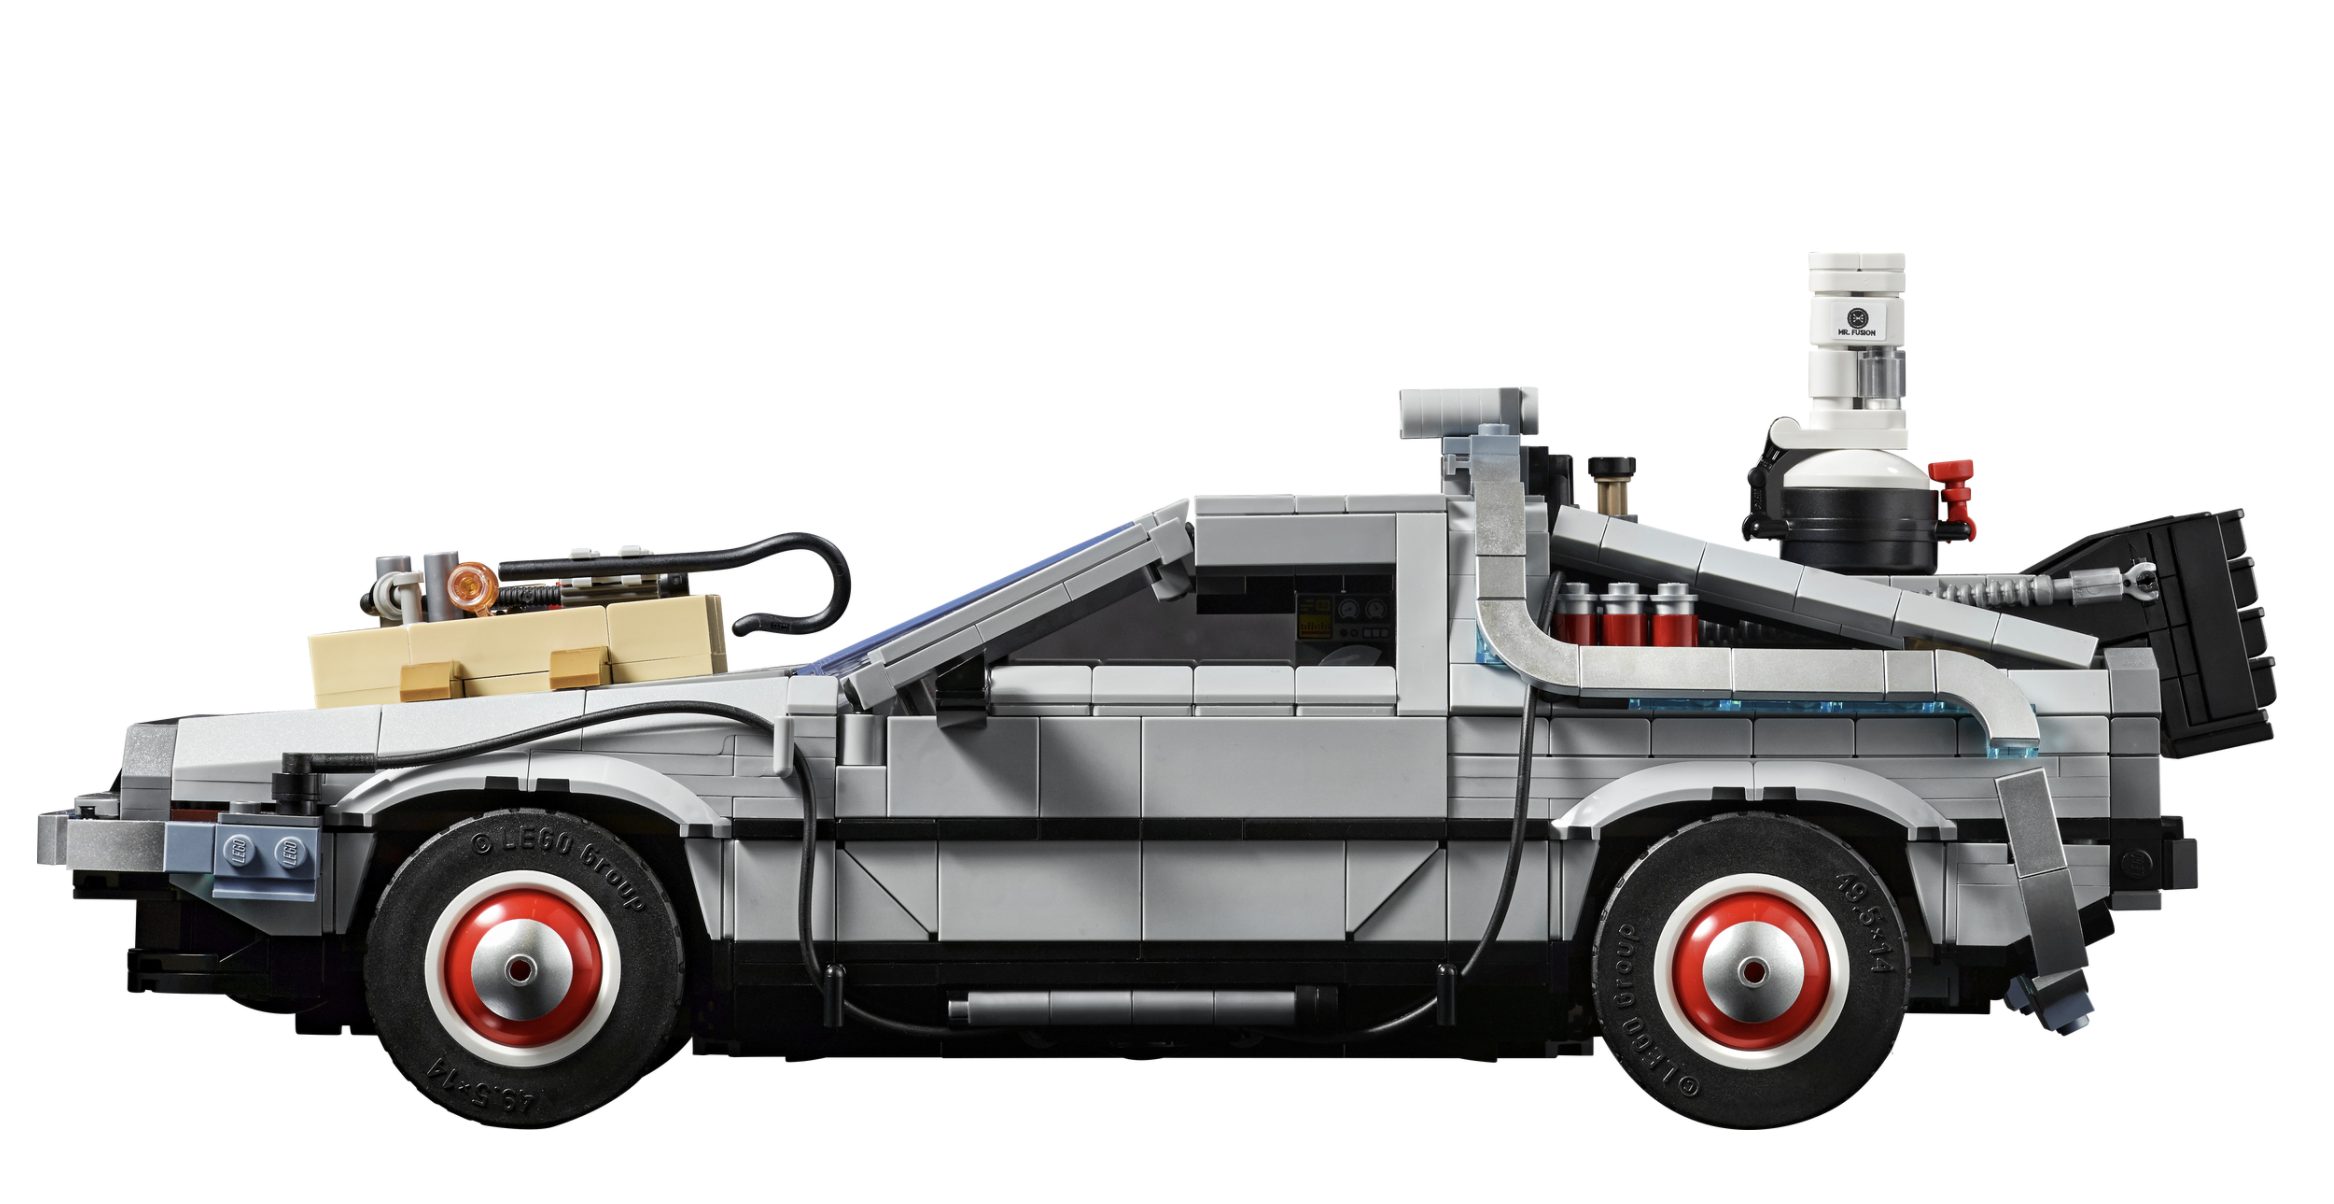 Has the Iconic 'Back to the Future' DeLorean Lego Set at an